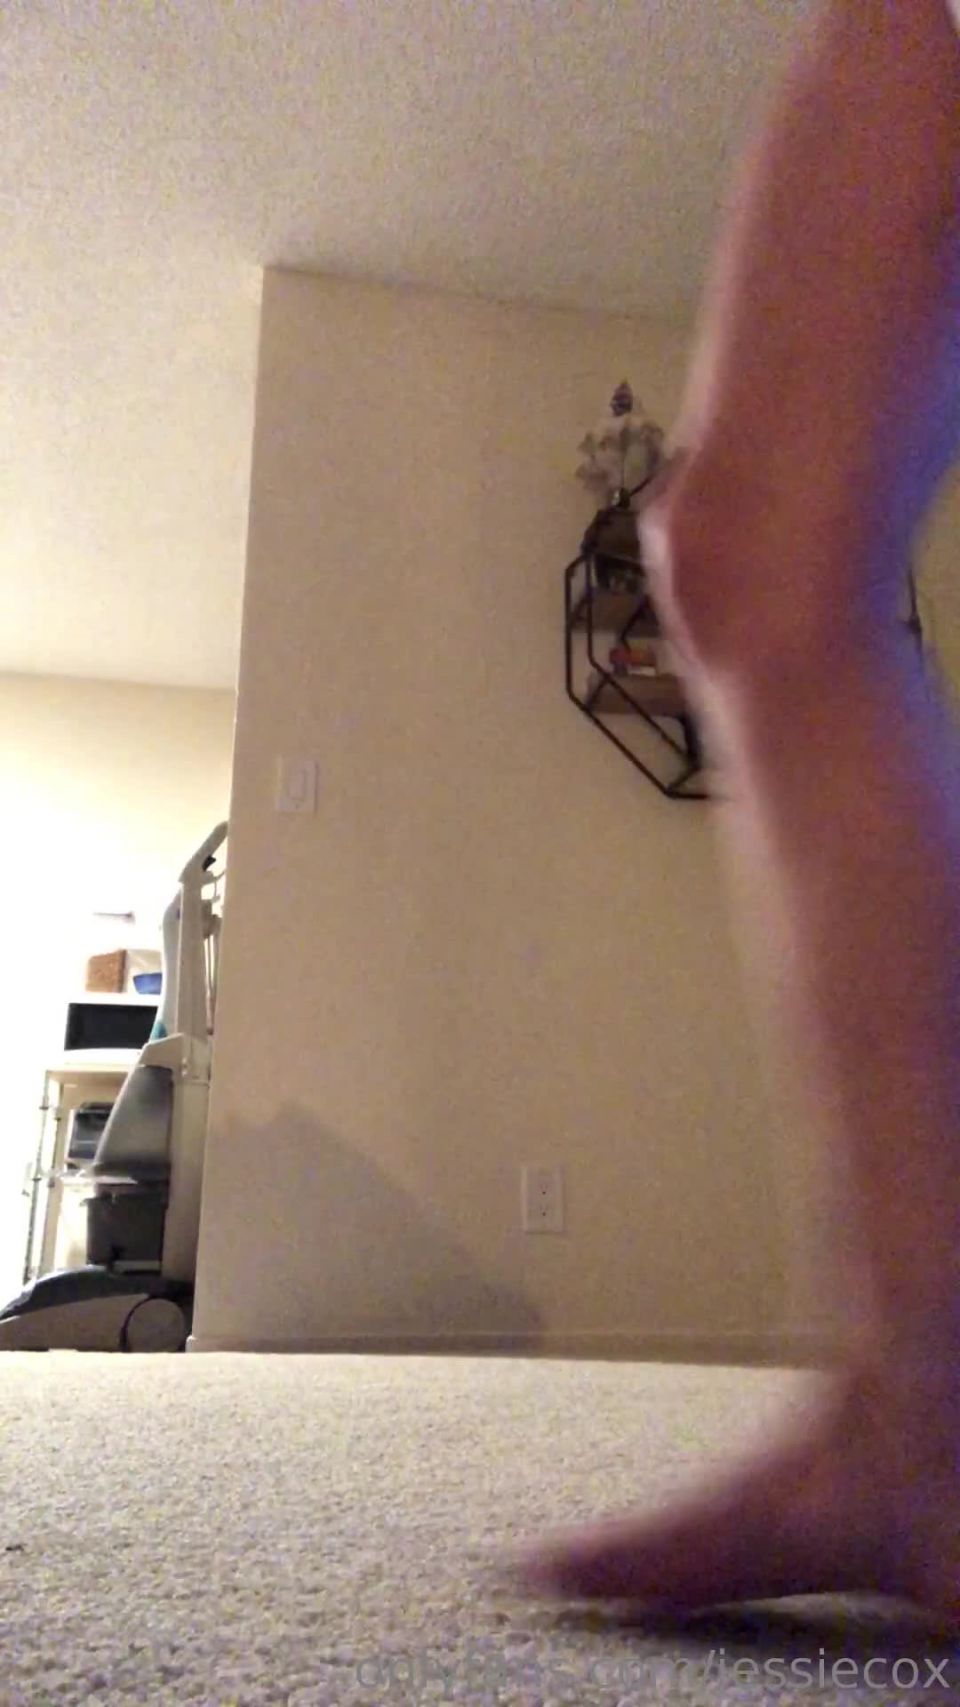 [Onlyfans] jessiecox-12-03-2019-24746431-Oh gosh these handstands are rough tonight